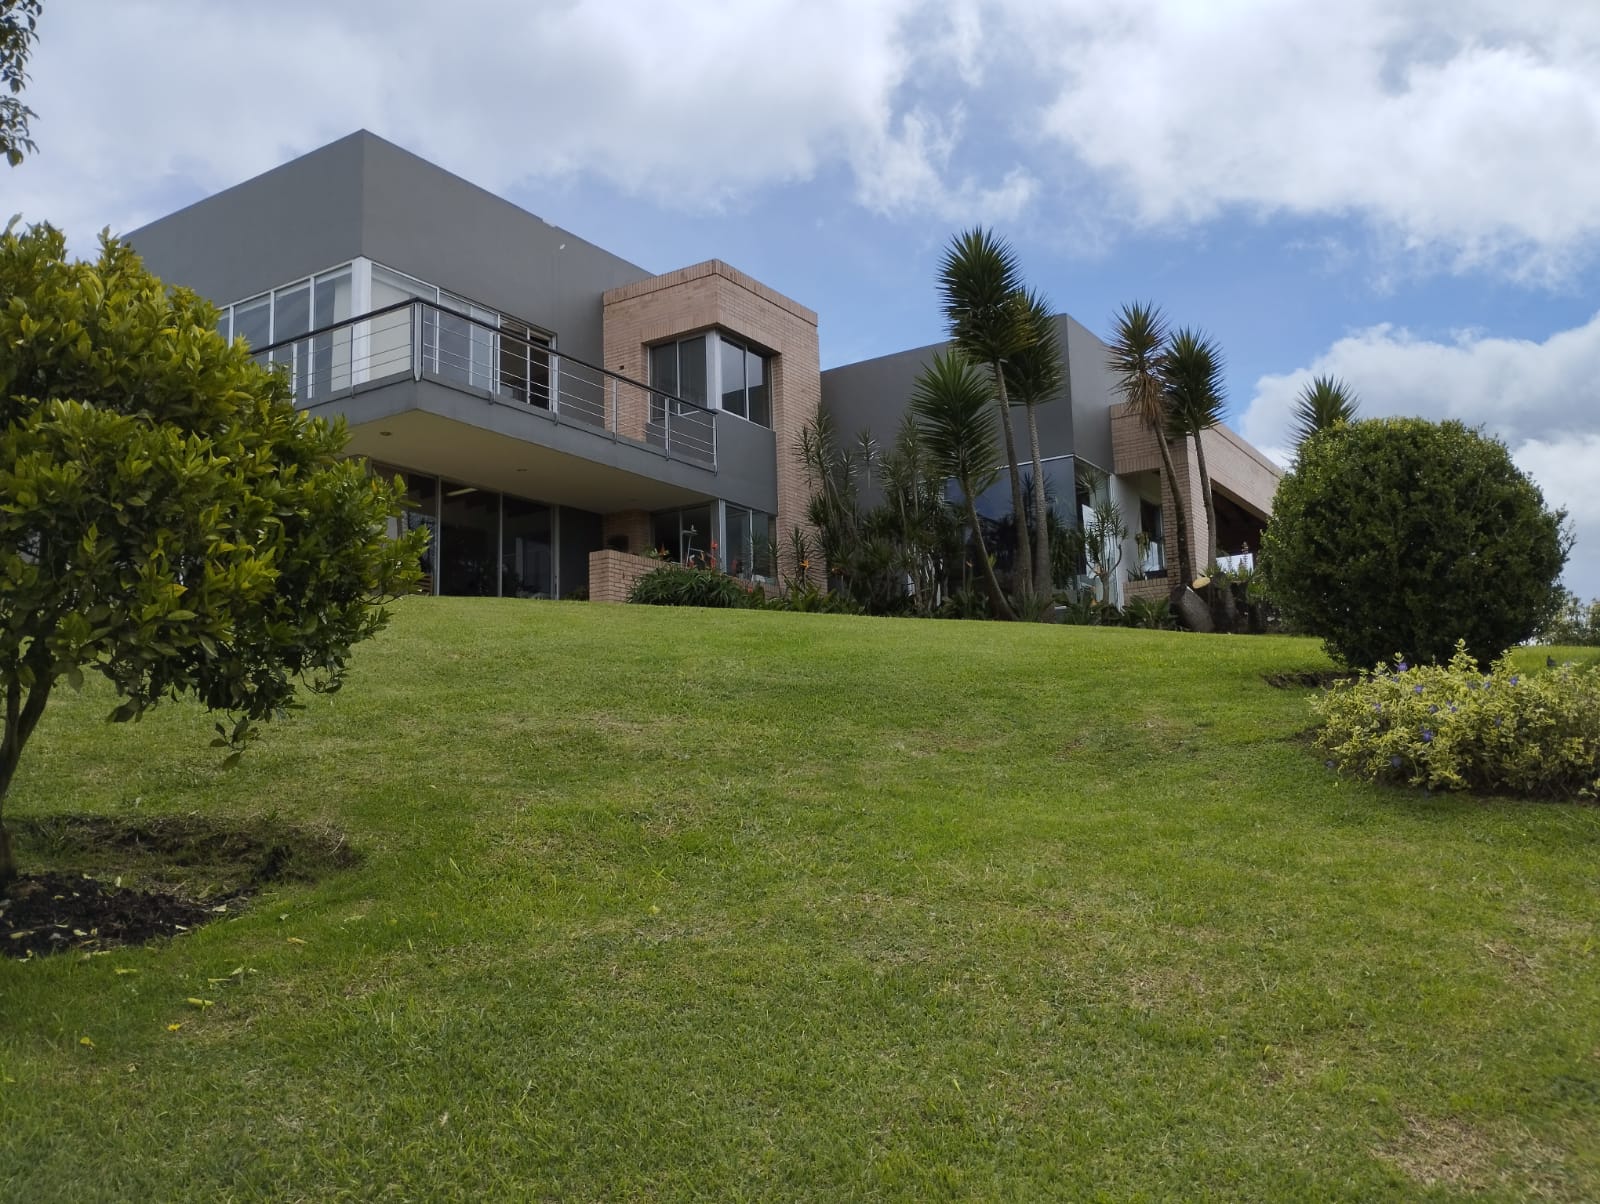 Well-Constructed Envigado 5BR Home With Beautifully Manicured 1.78 Acres, High Ceilings, and 20 Min. to International Airport